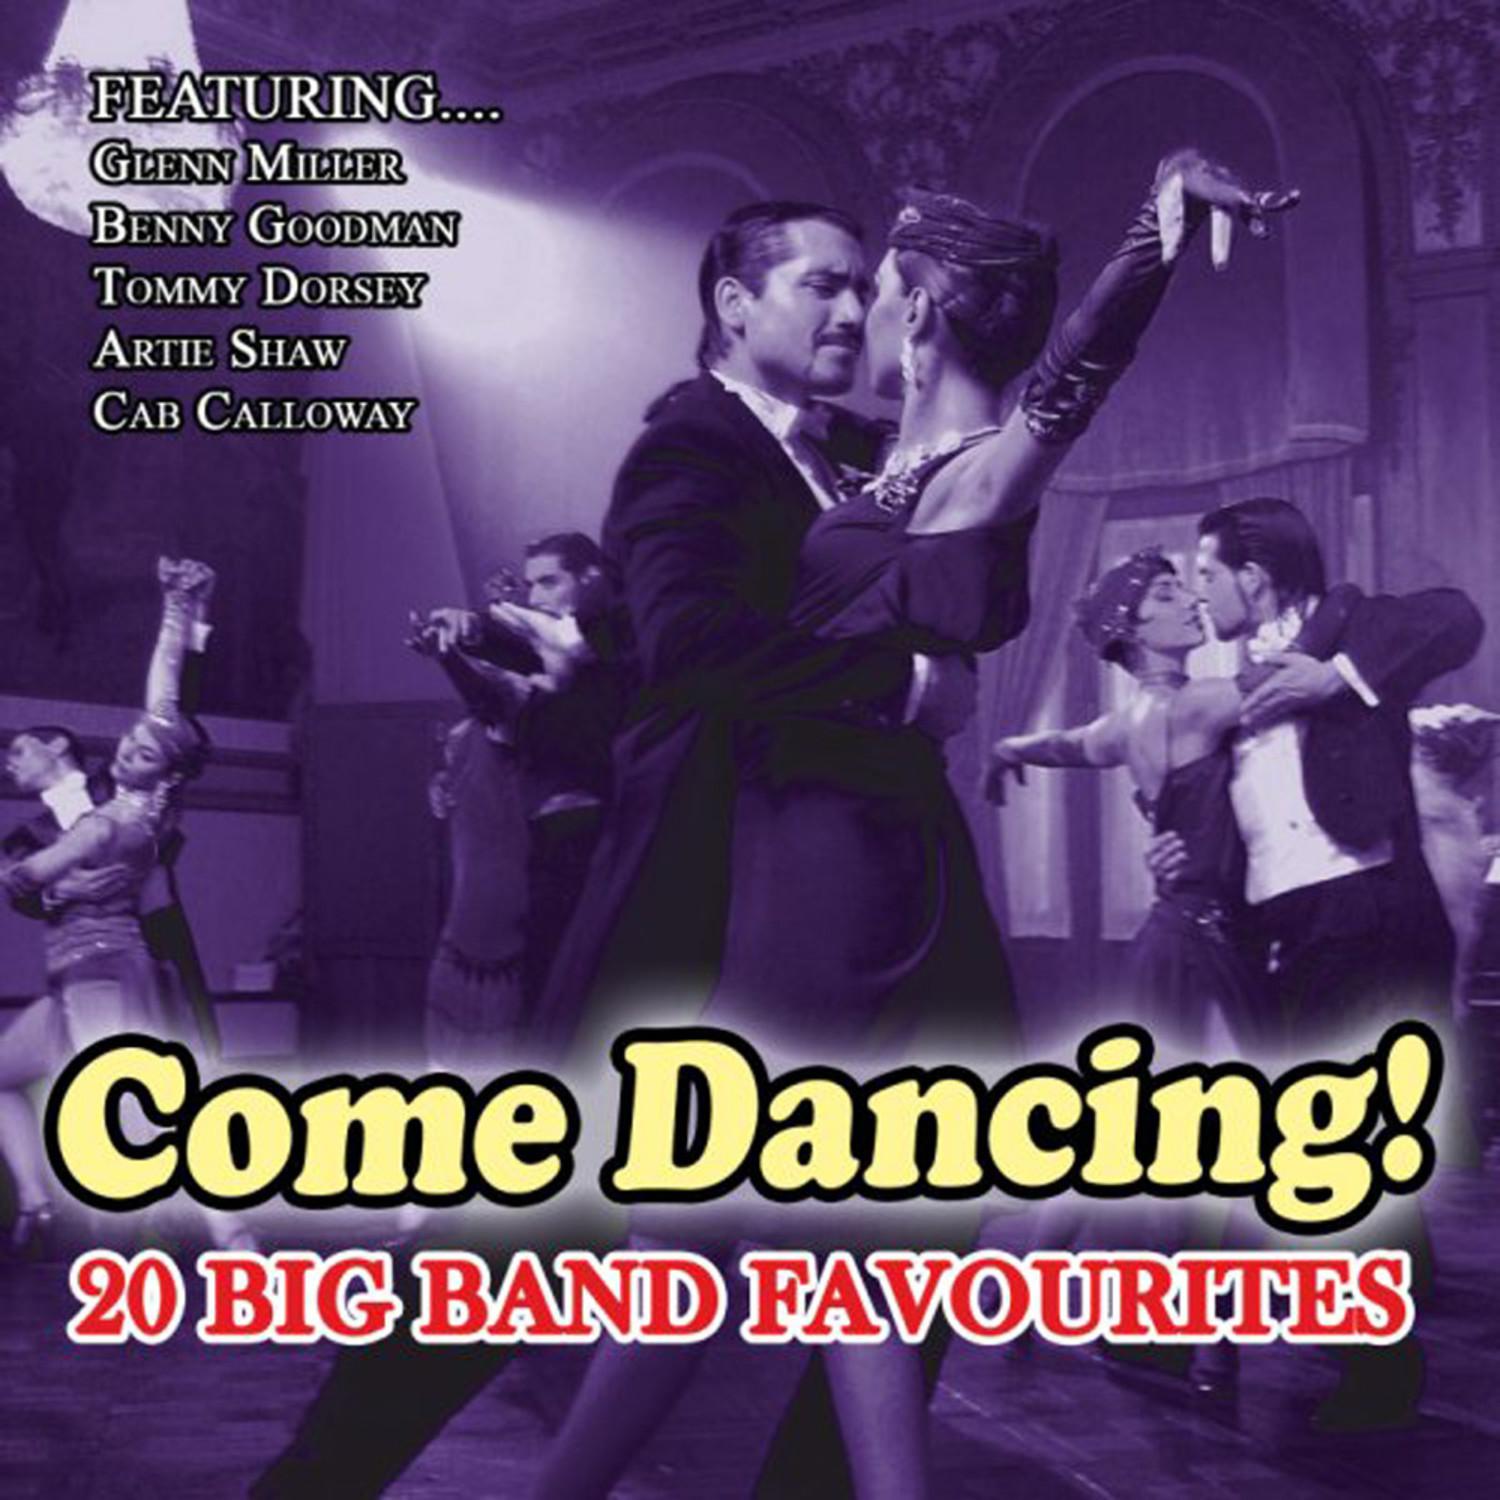 COME DANCING-20 BIG BAND FAVOURITES